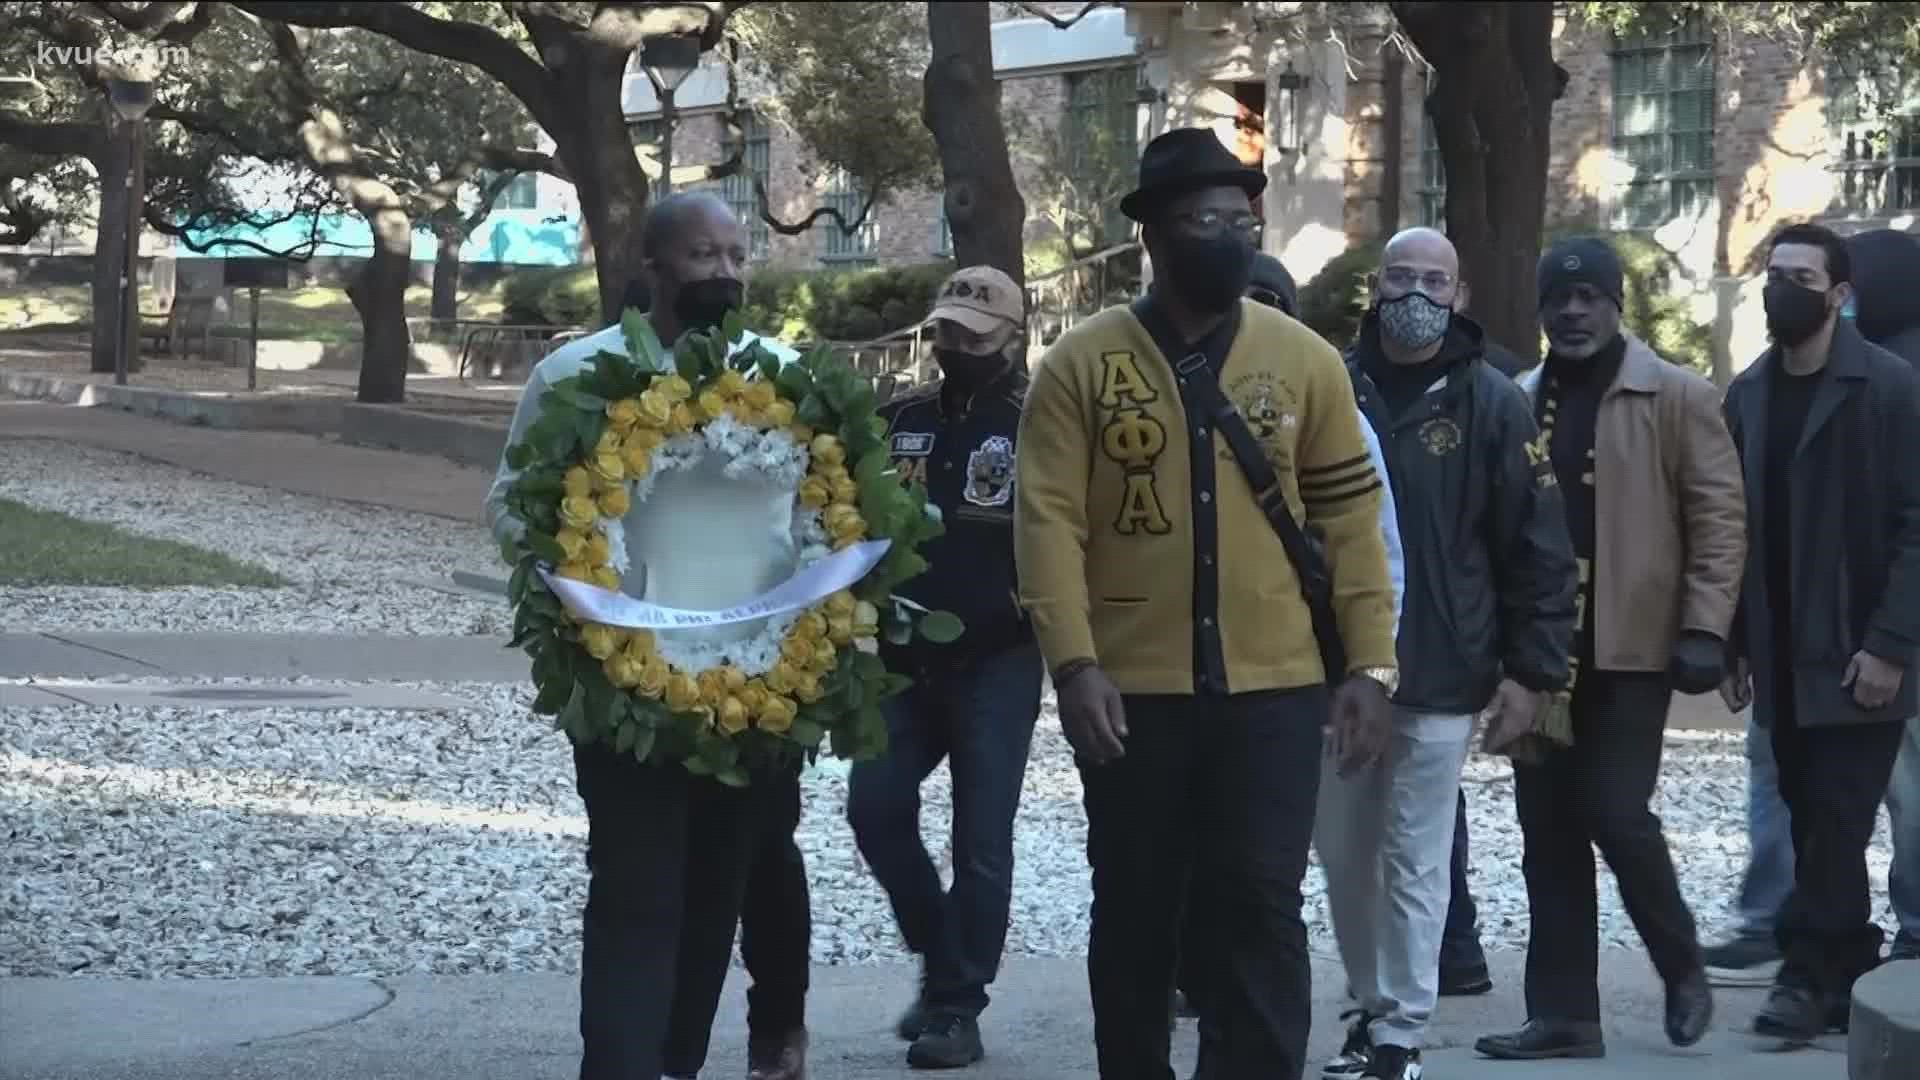 The Austin alumni chapter of Alpha Phi Alpha Fraternity Inc. held a wreath laying ceremony to honor Dr. Martin Luther King Jr.